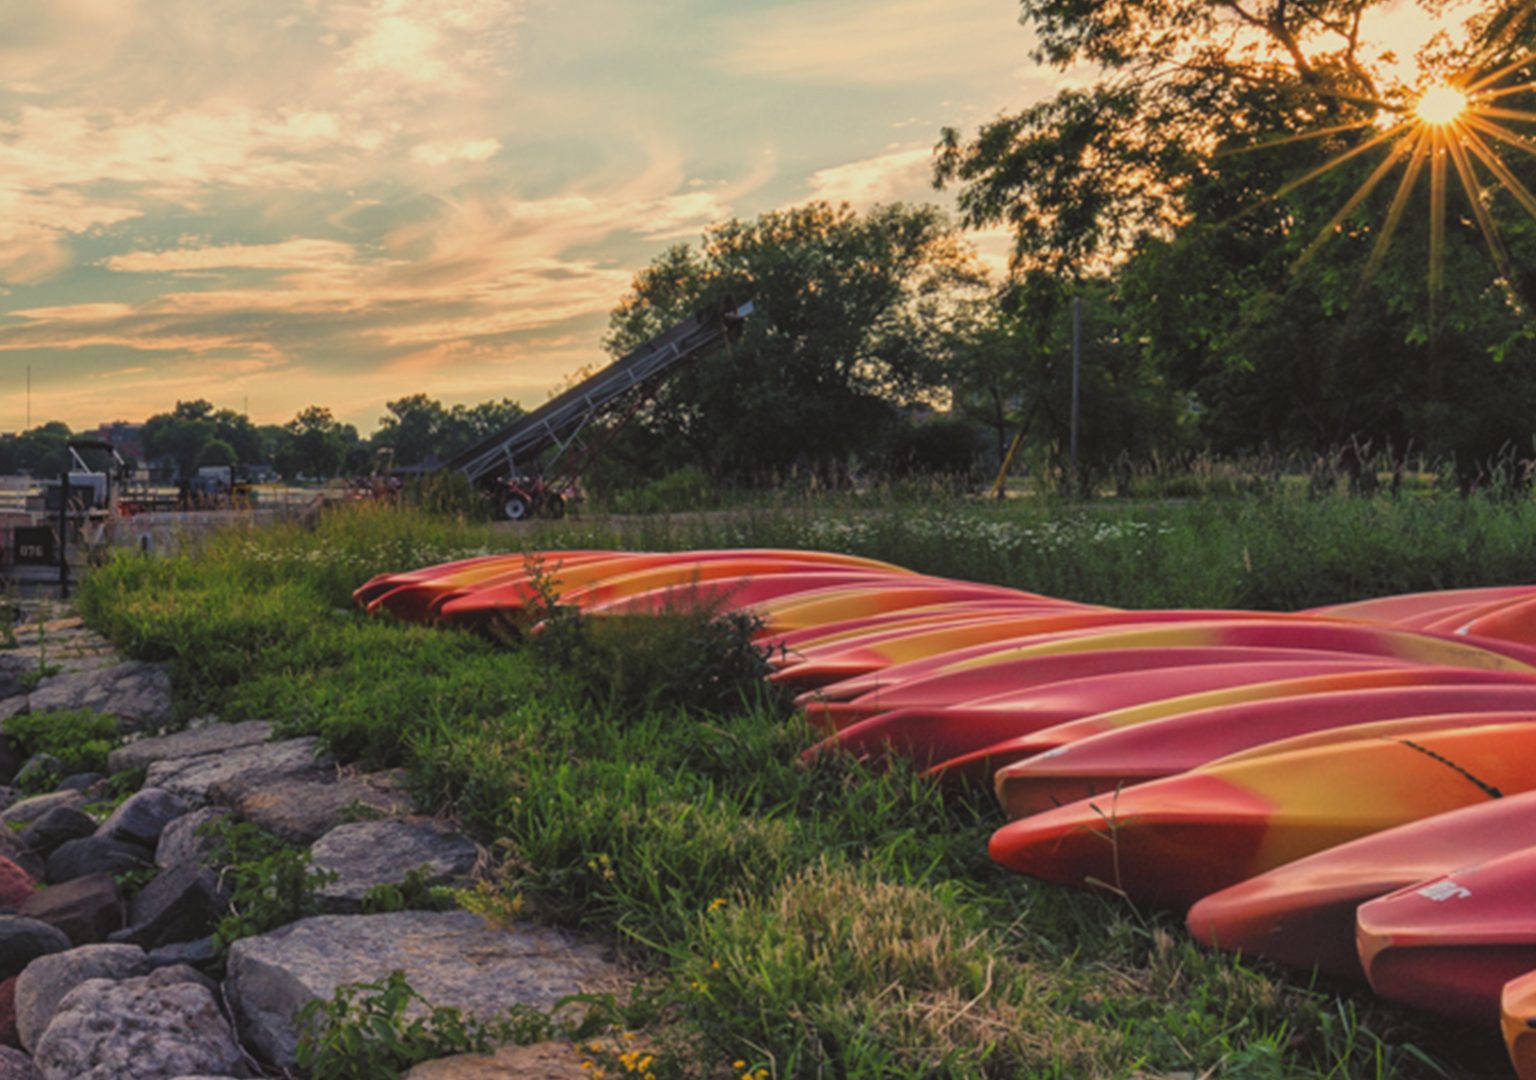 Canoes line the shore of Lake Mendota as the sun sets behind grove of trees in background